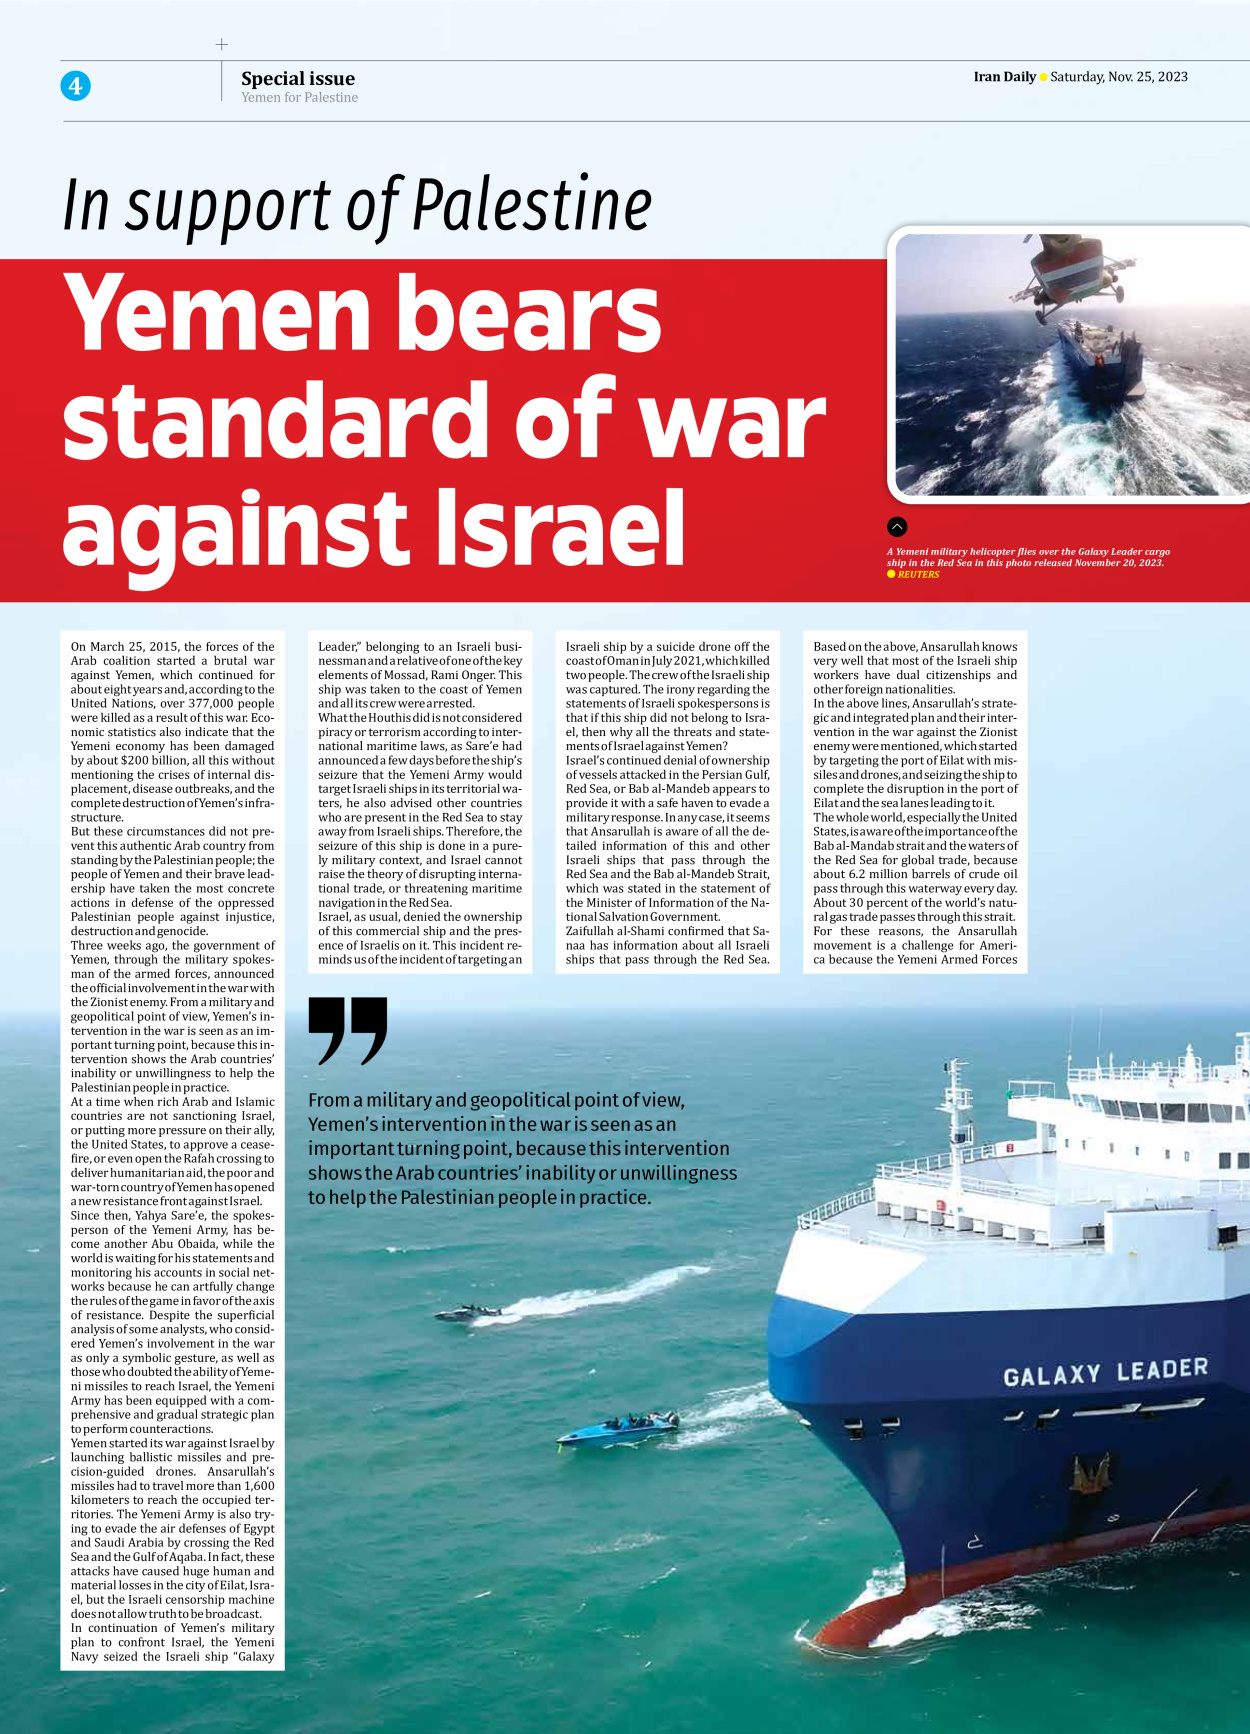 Iran Daily - Number Seven Thousand Four Hundred and Forty Three - 25 November 2023 - Page 4